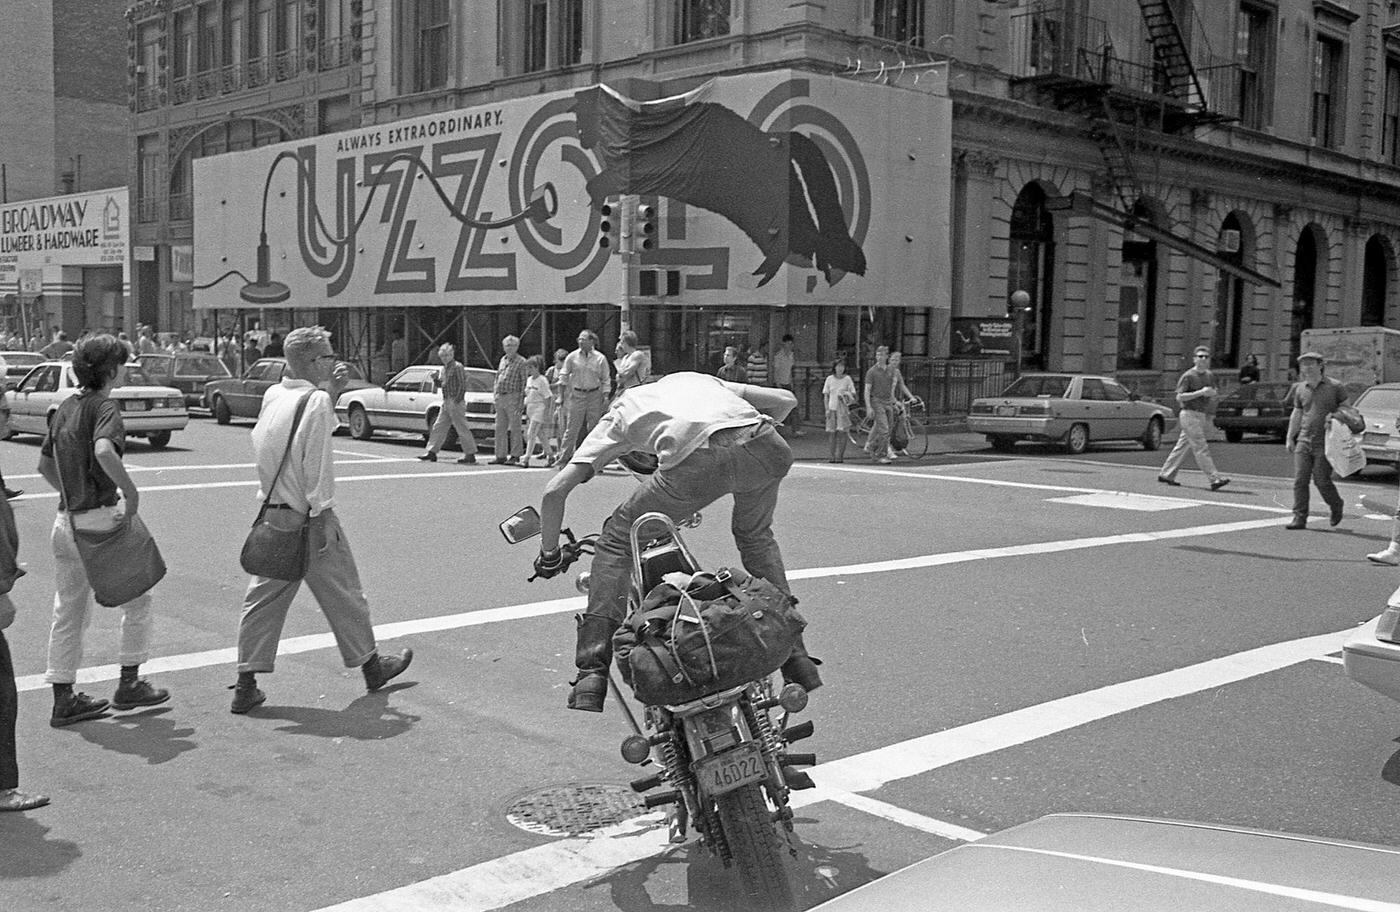 Motorcyclist On Broadway, View Of A Man Kick Starting His Motorcycle, Greenwich Village, Manhattan, 1989